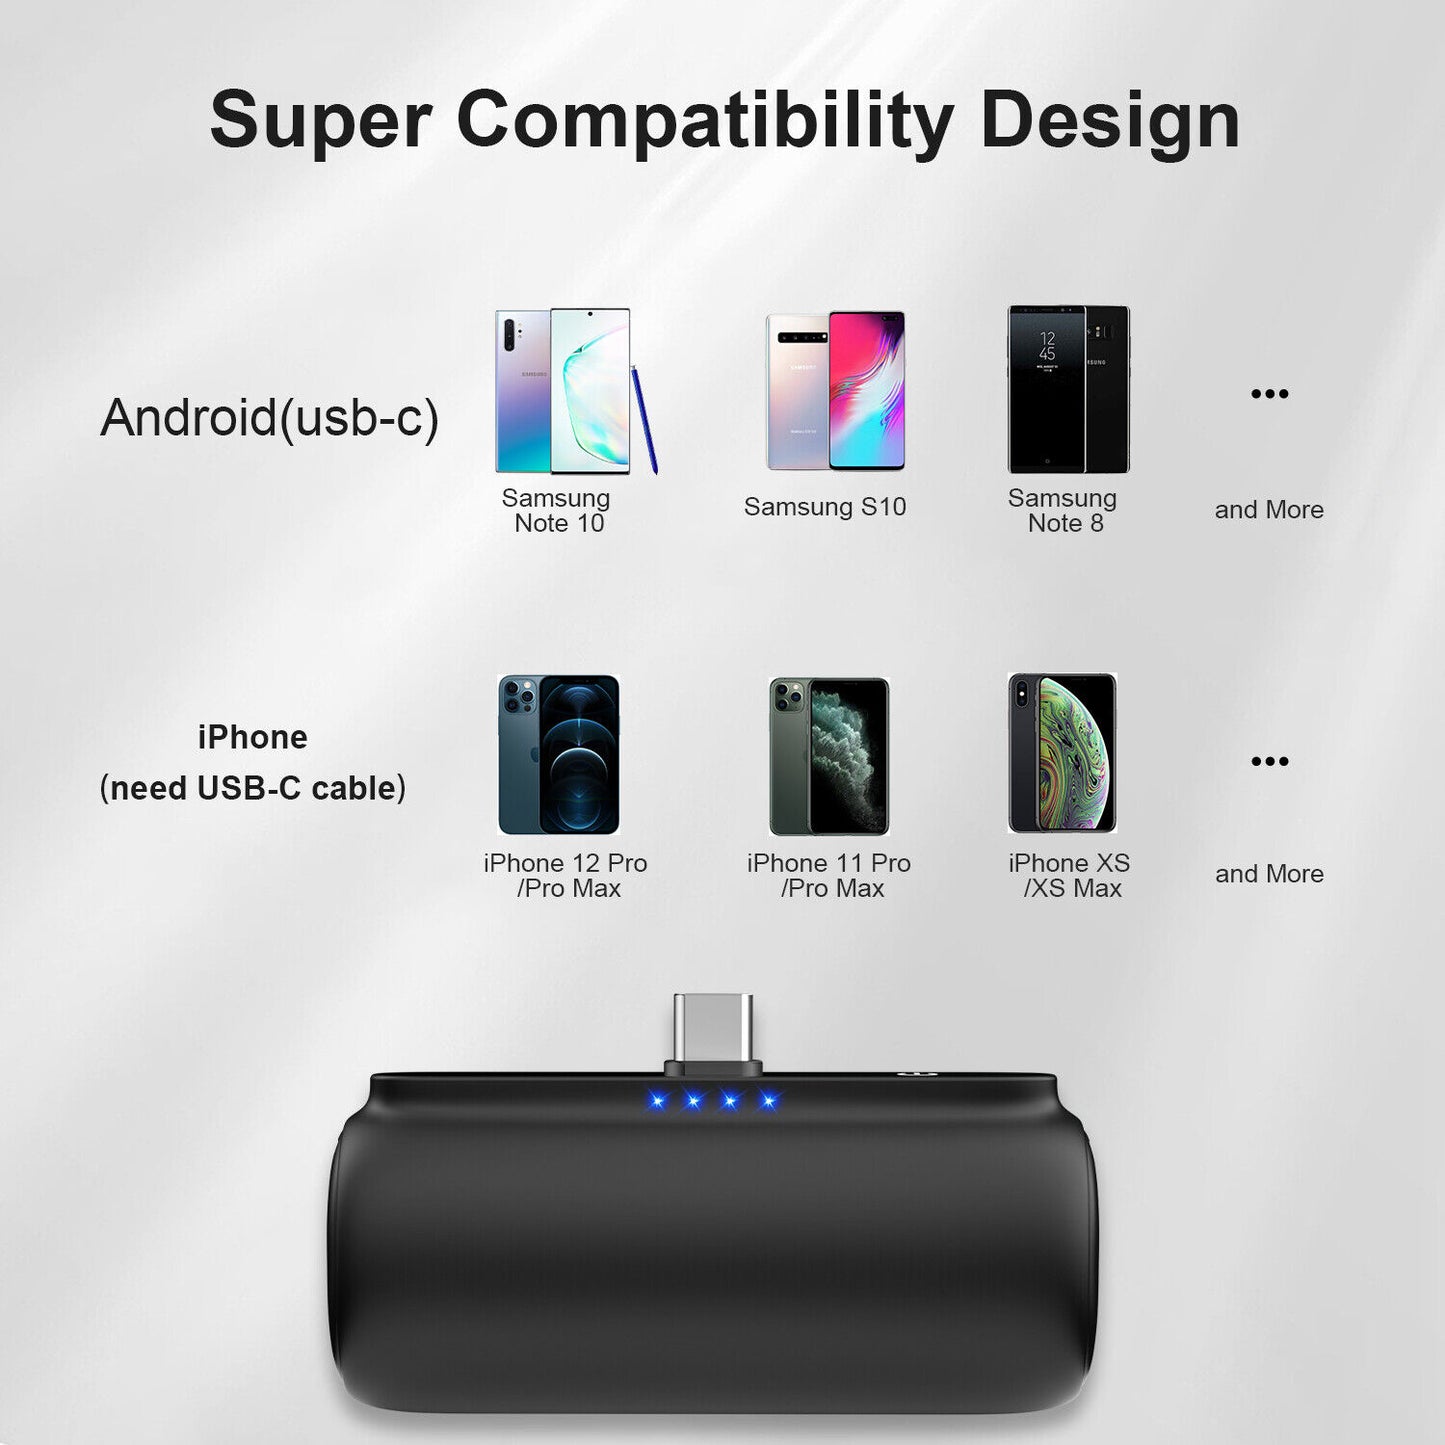 Mini Power Bank Portable Charger for Iphone or Type C Phones Instant Charging